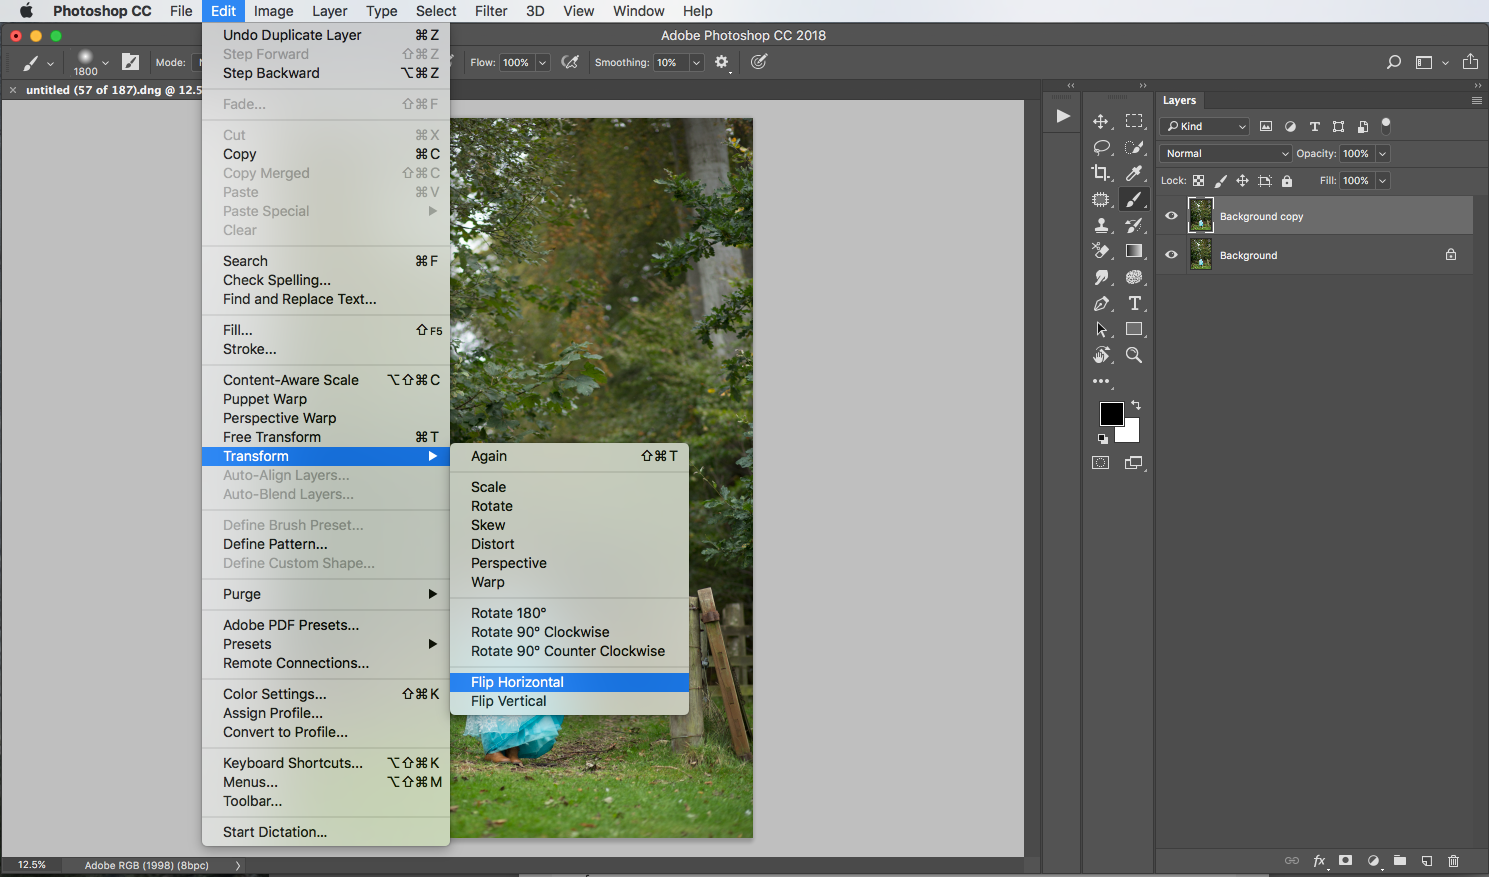 How to Mirror the Background in Photoshop